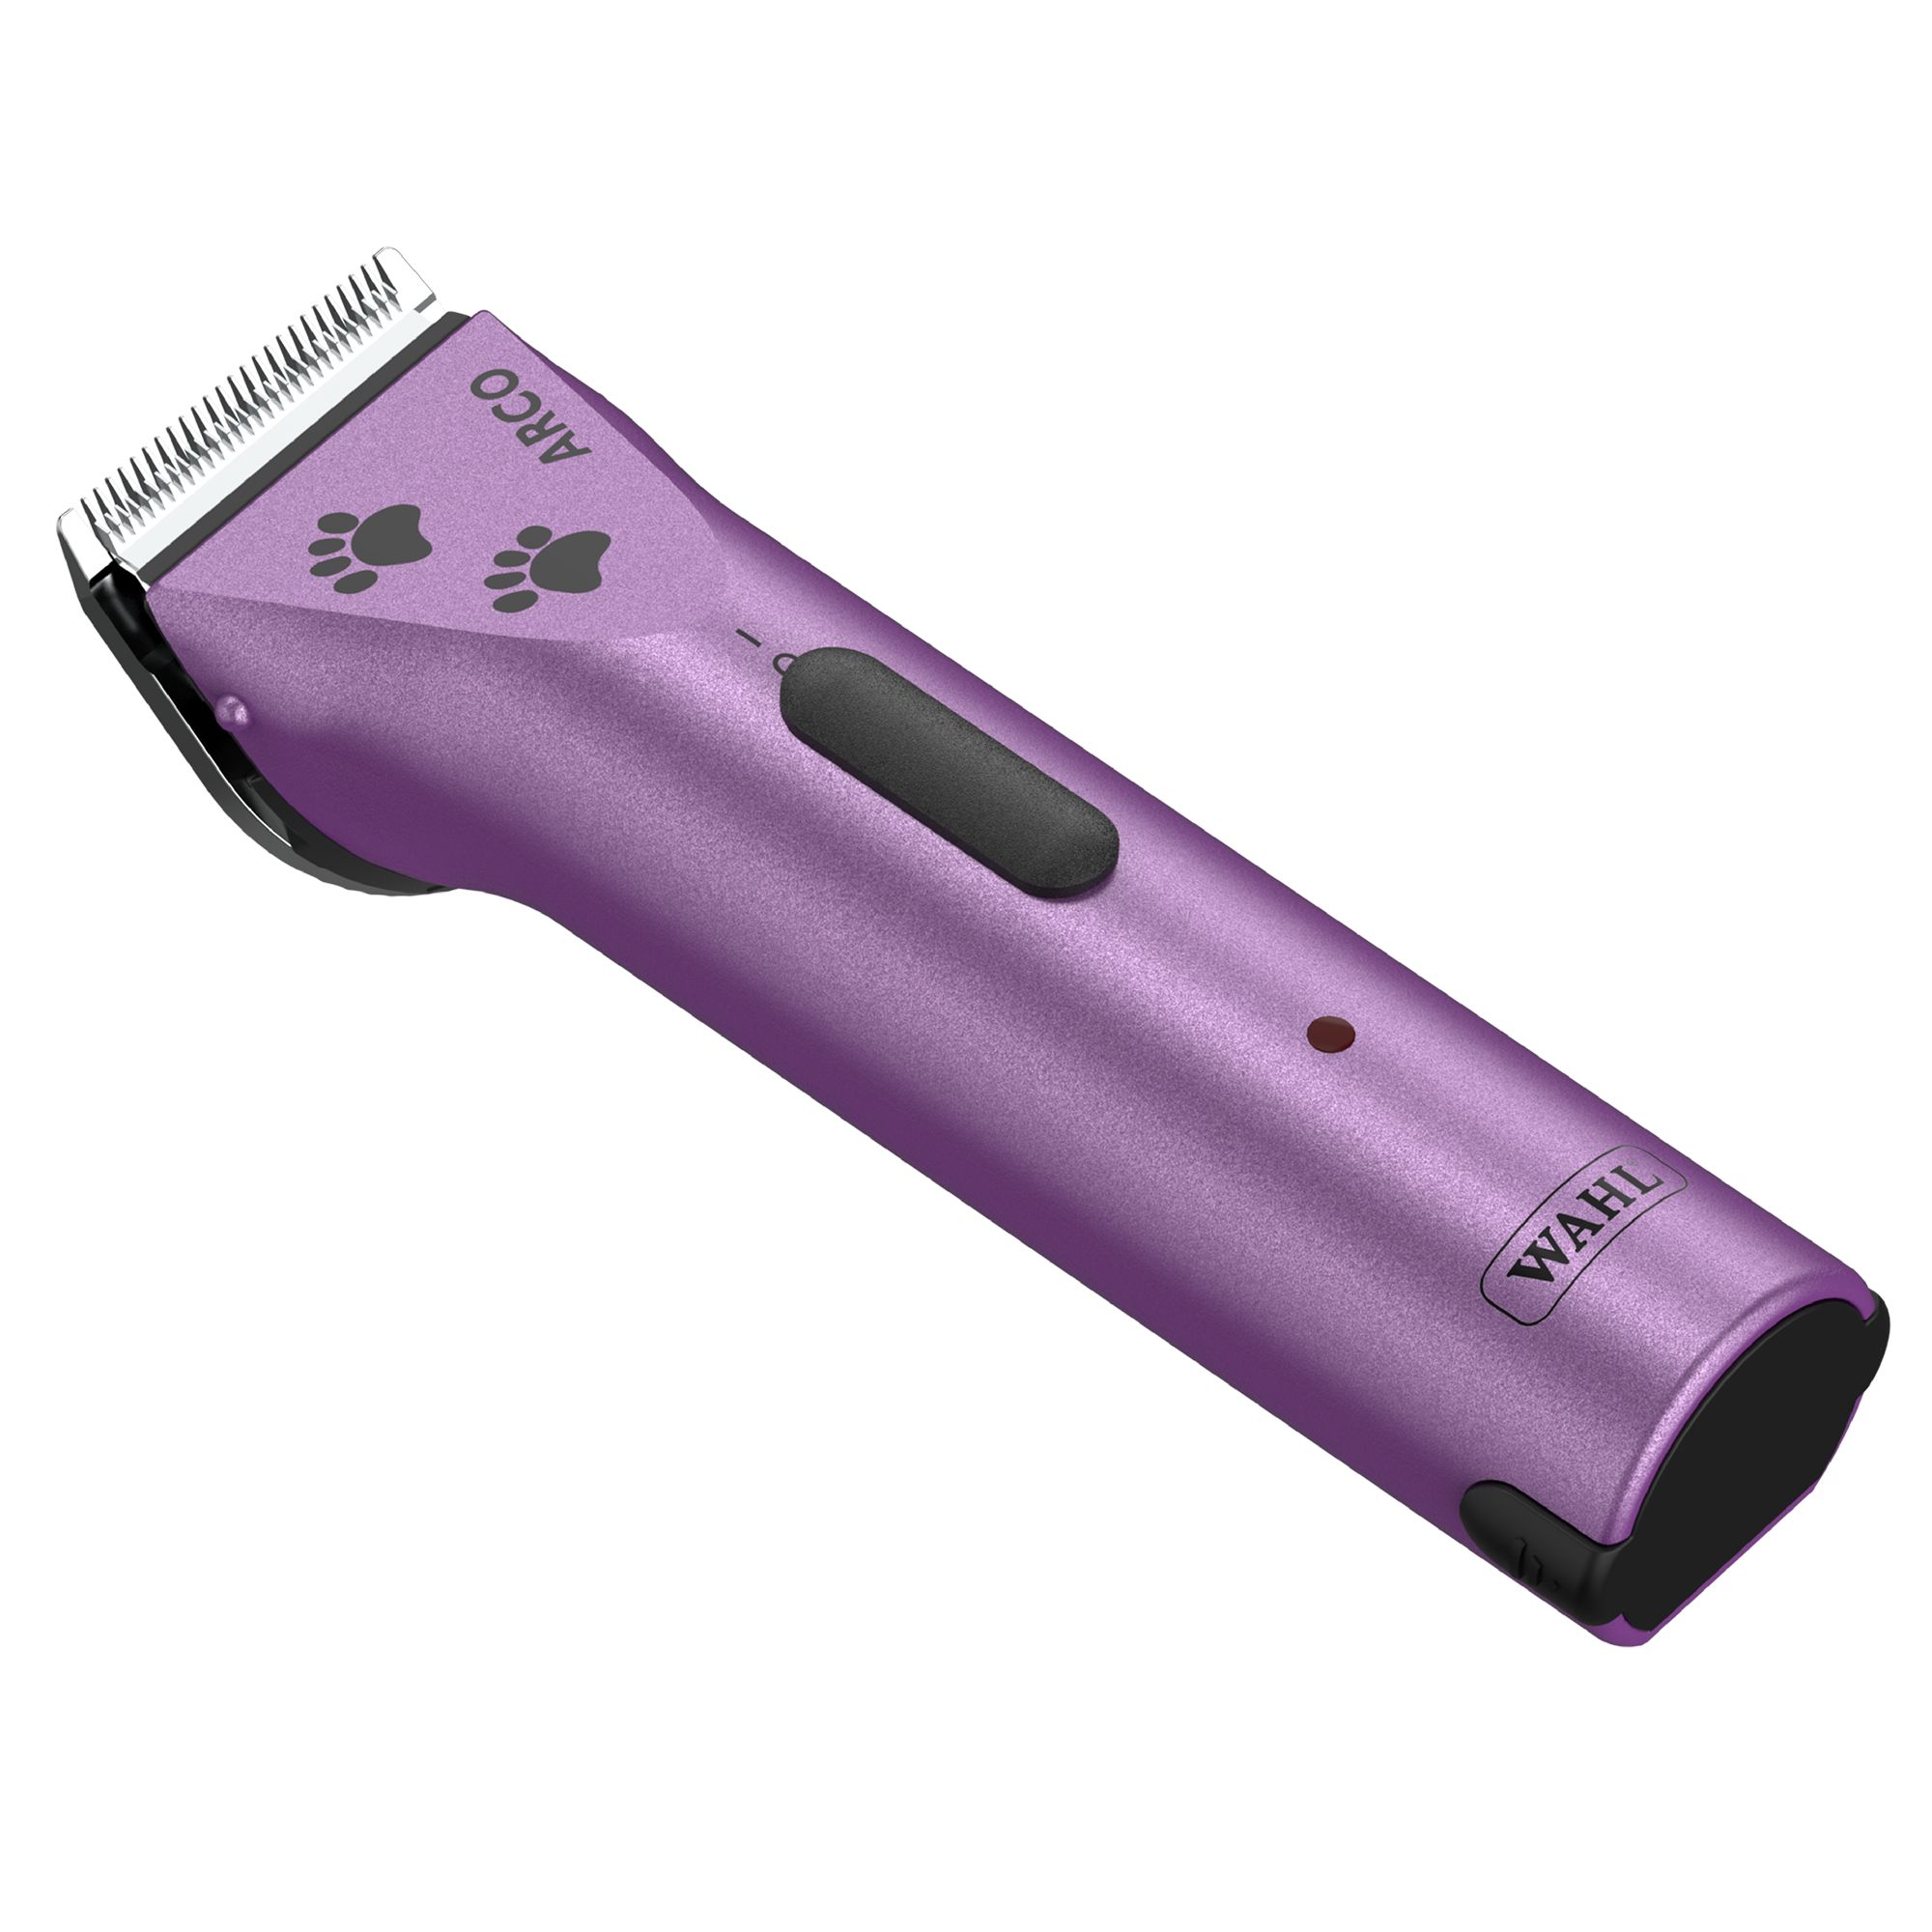 rechargeable pet clippers